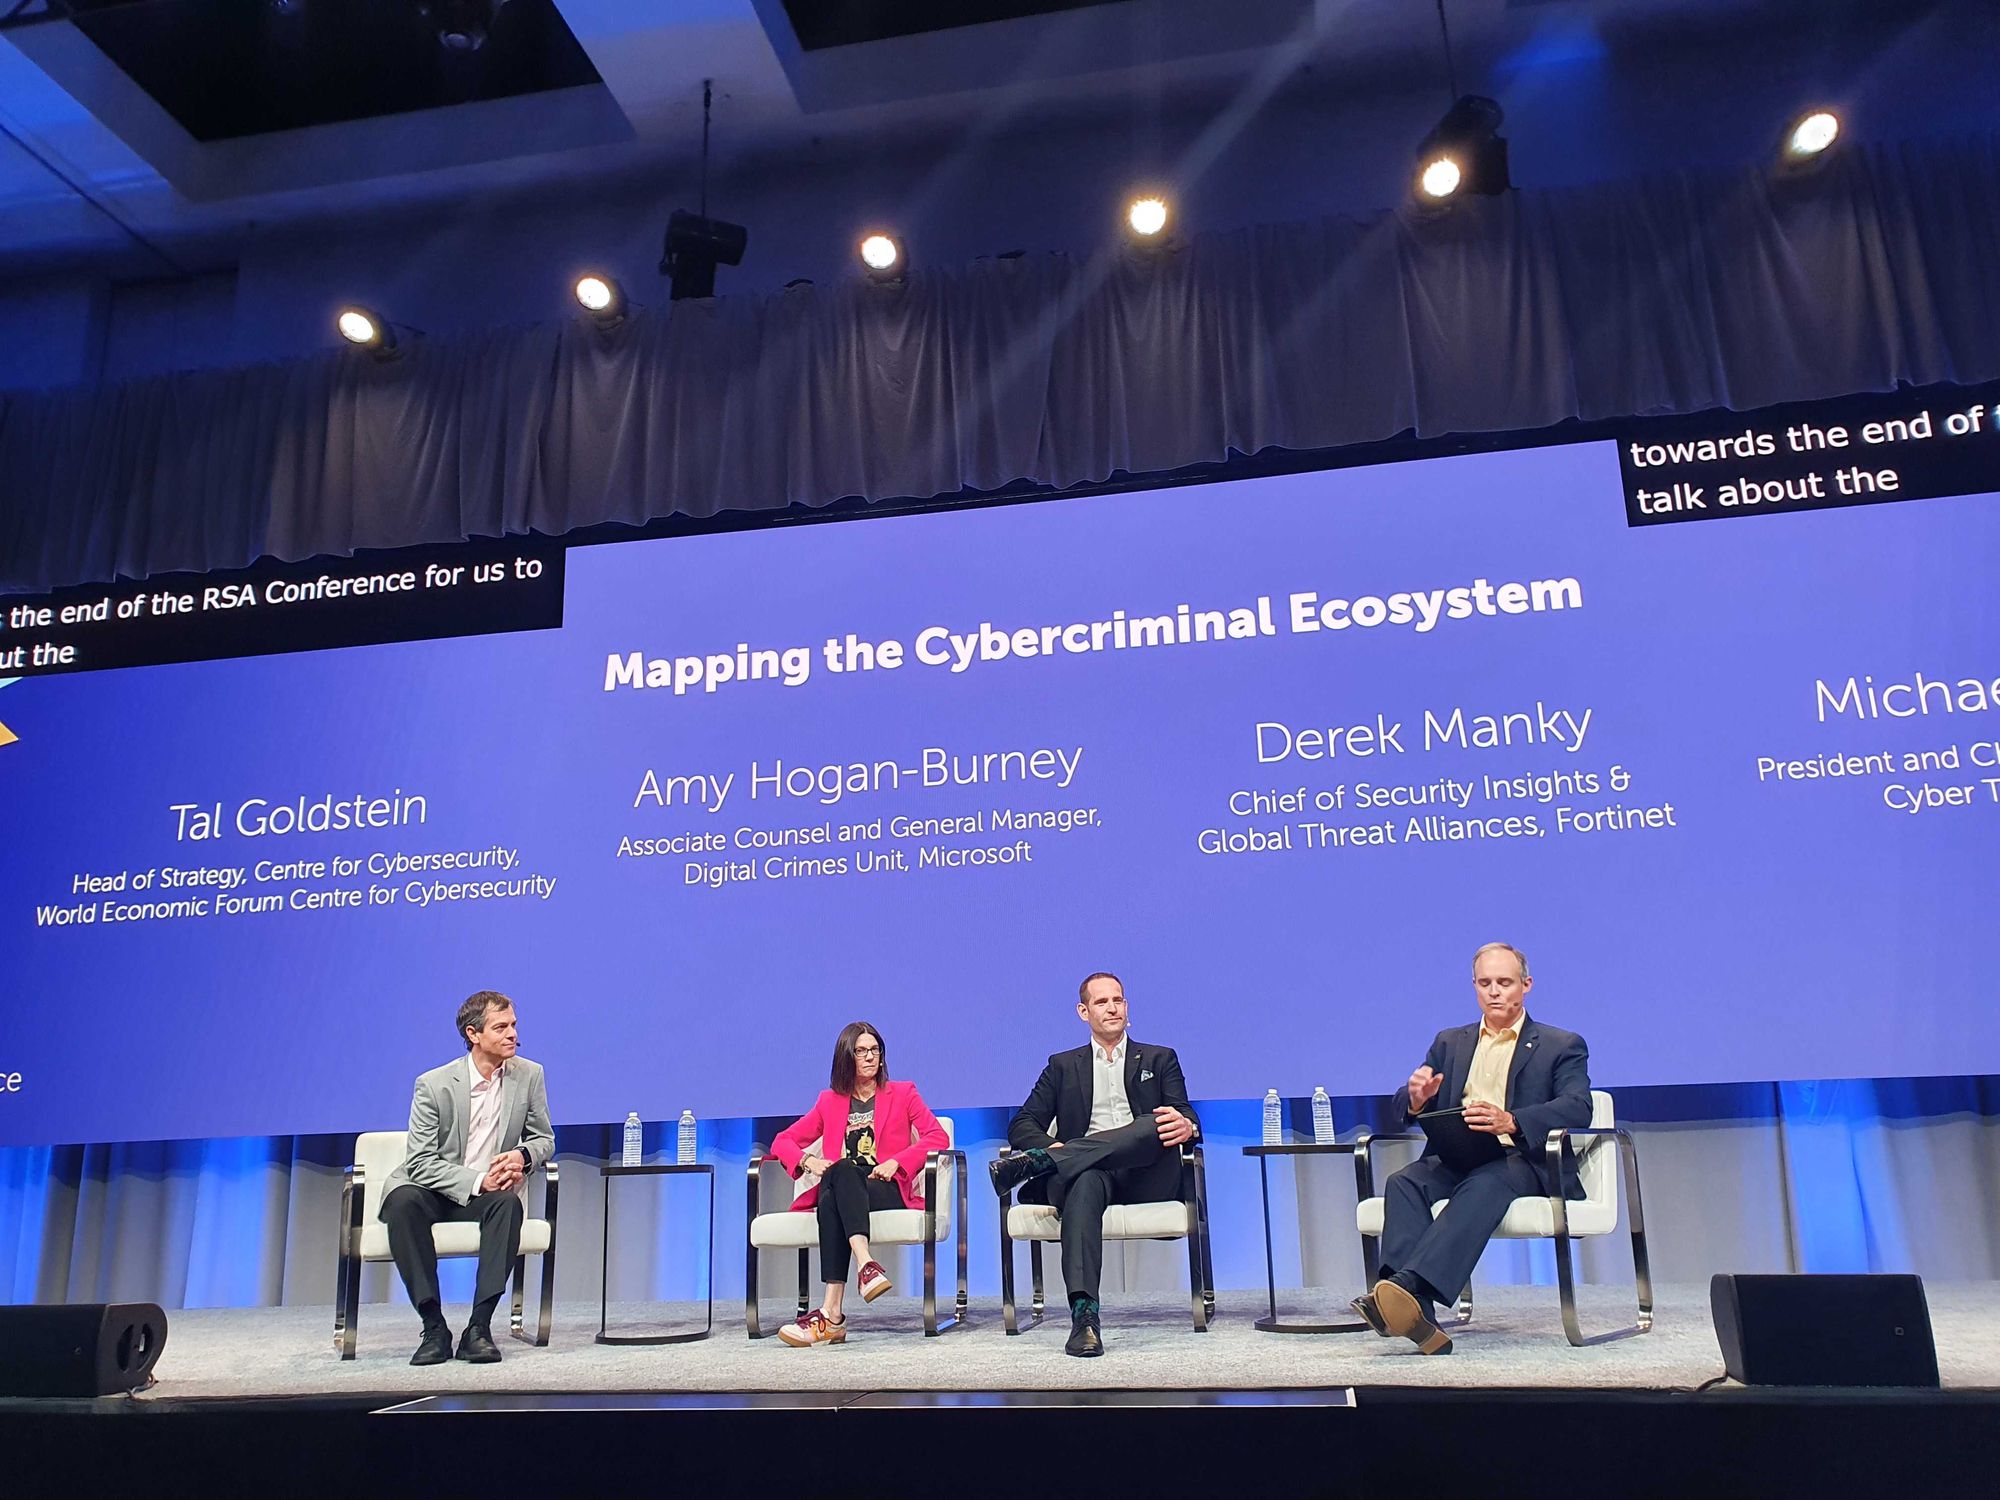 mapping cybercriminal ecosystem - [Weekend Briefing] 10 takeaways from the RSAC 2022